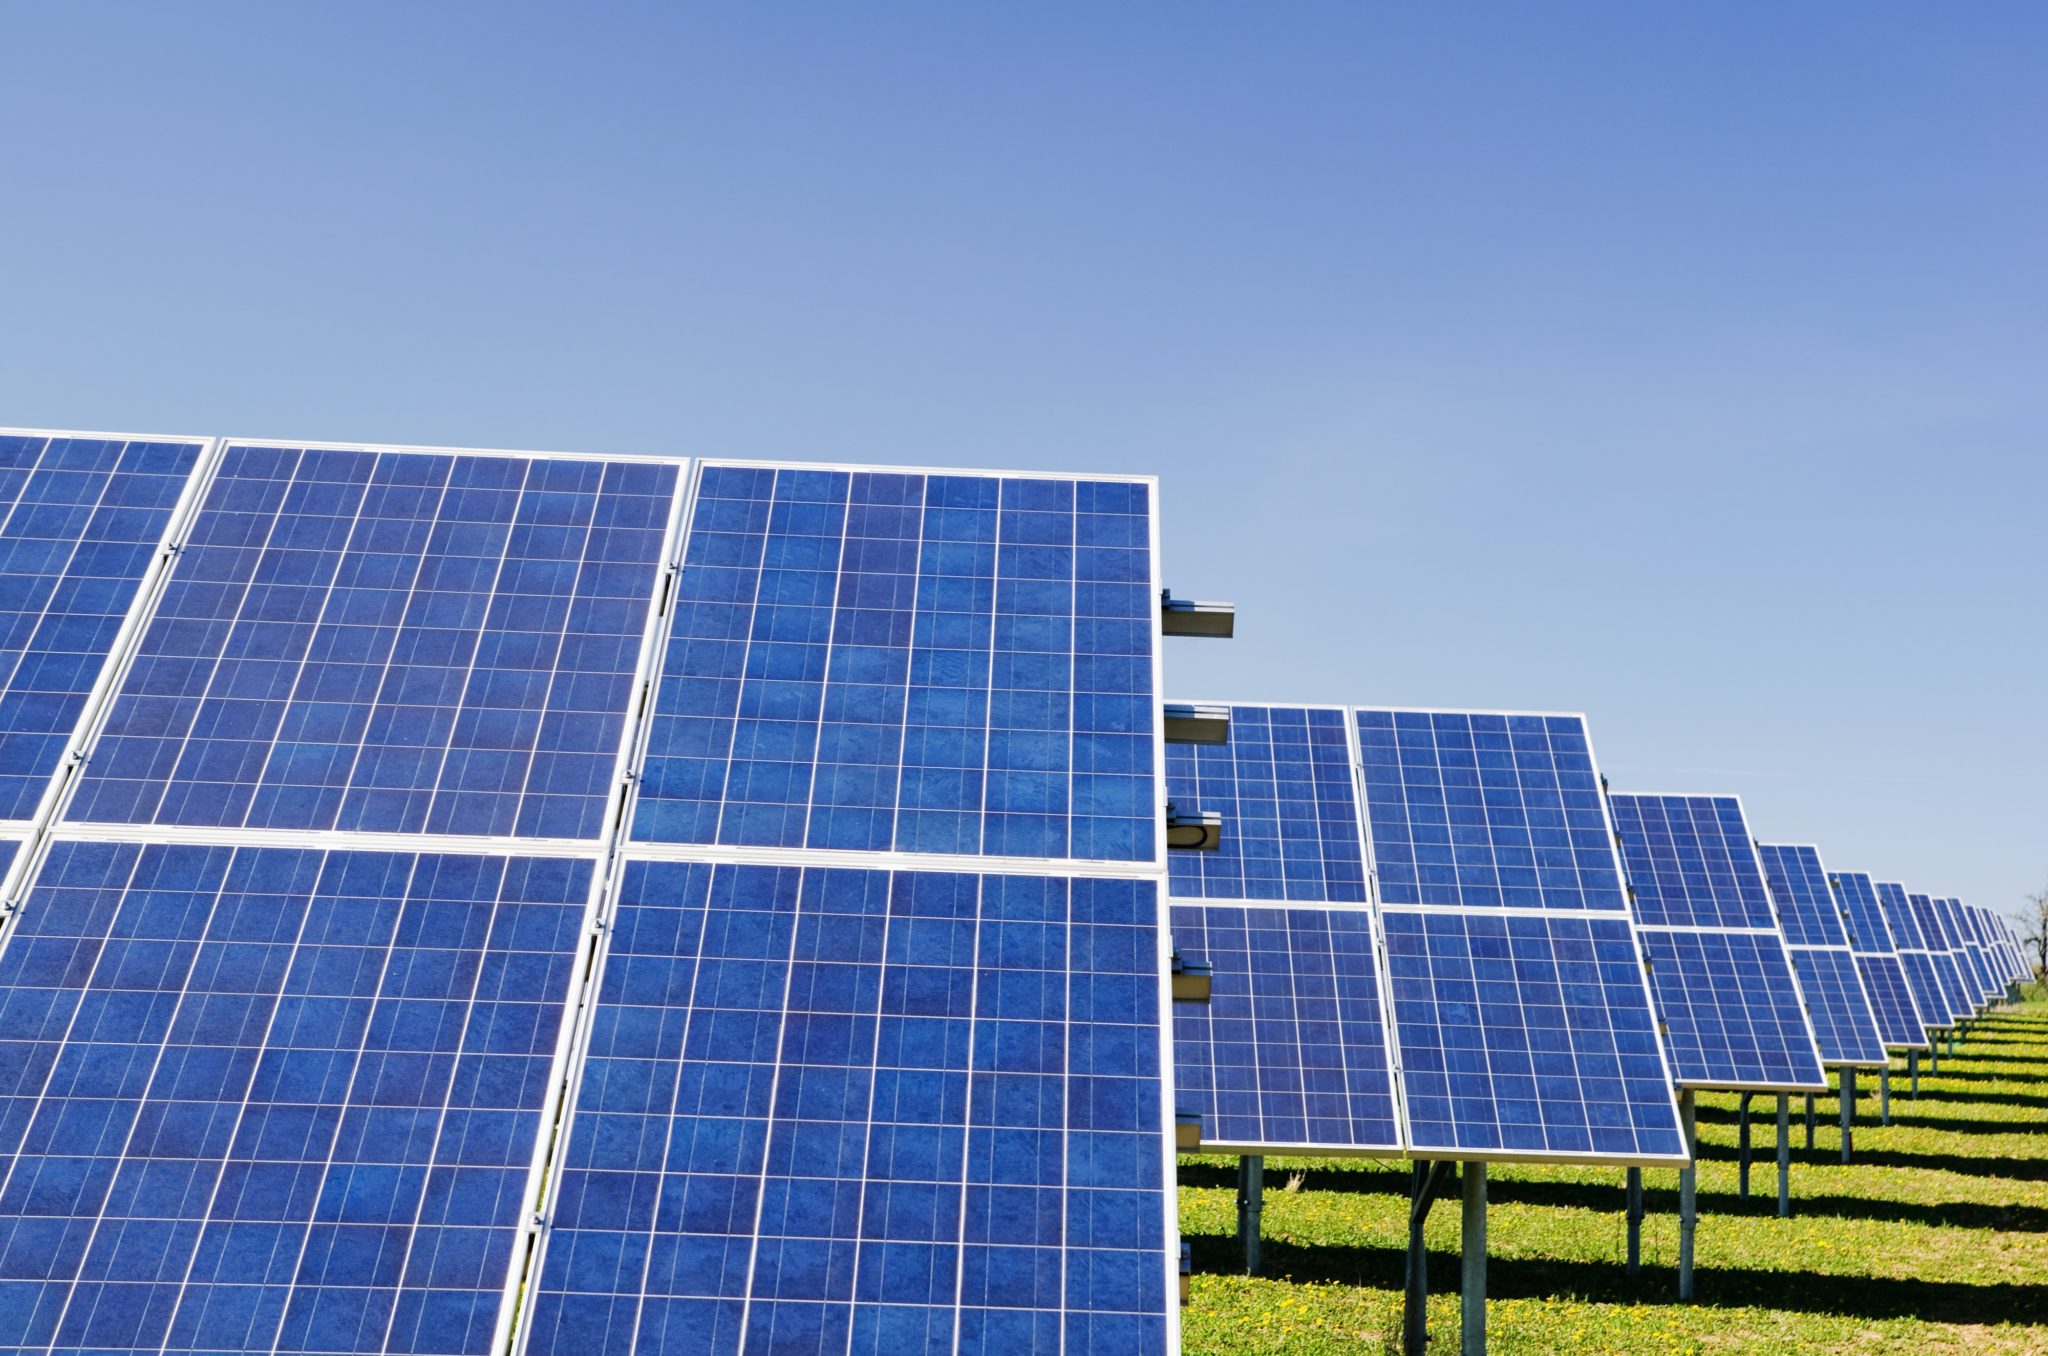 New WEEE Forum paper: issues with PV panels & compliance with EPR